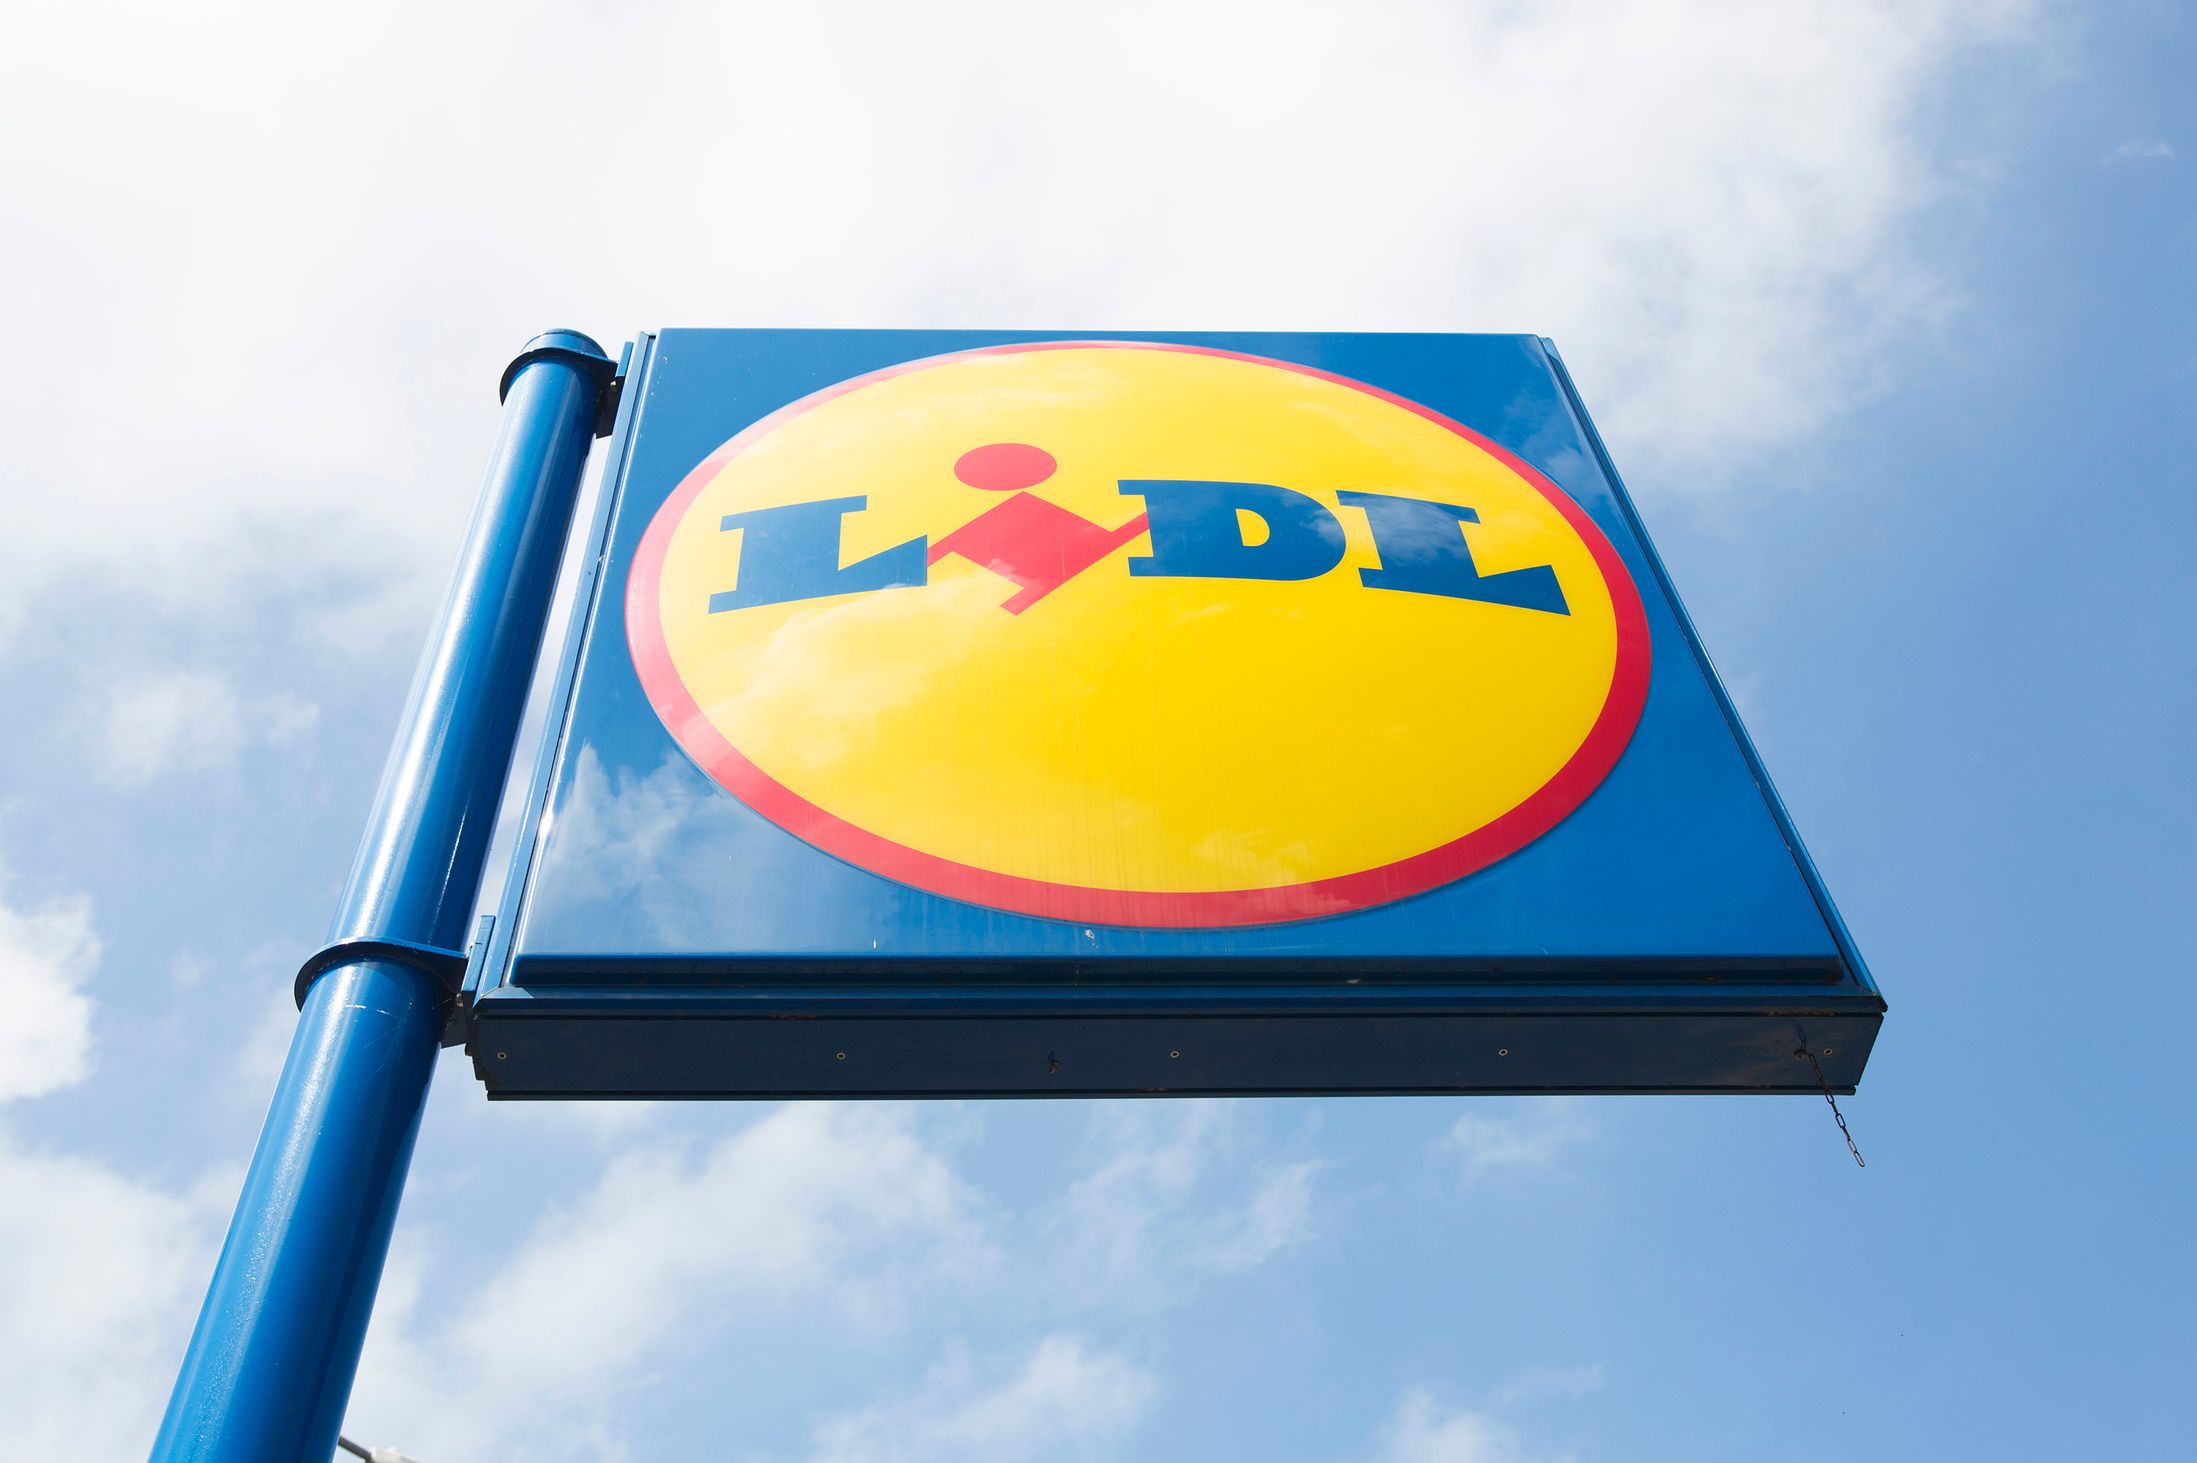 Lidl Unofficial Slimming World Shopping Guide  |  Slimming Recipes, Healthy Eating & Weight Loss